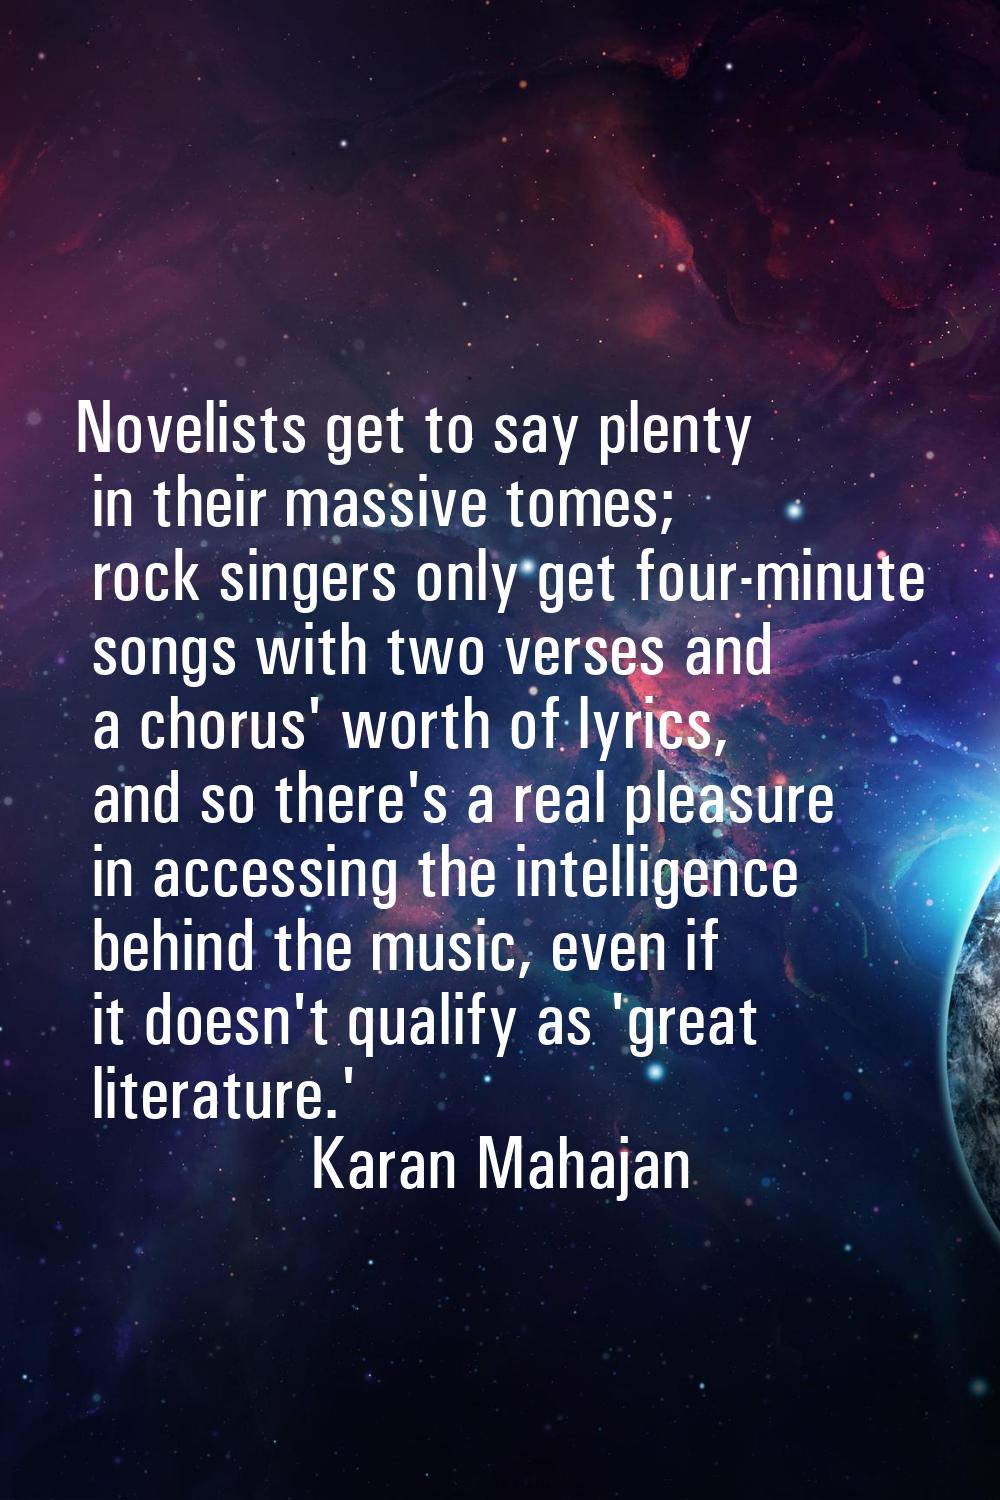 Novelists get to say plenty in their massive tomes; rock singers only get four-minute songs with tw